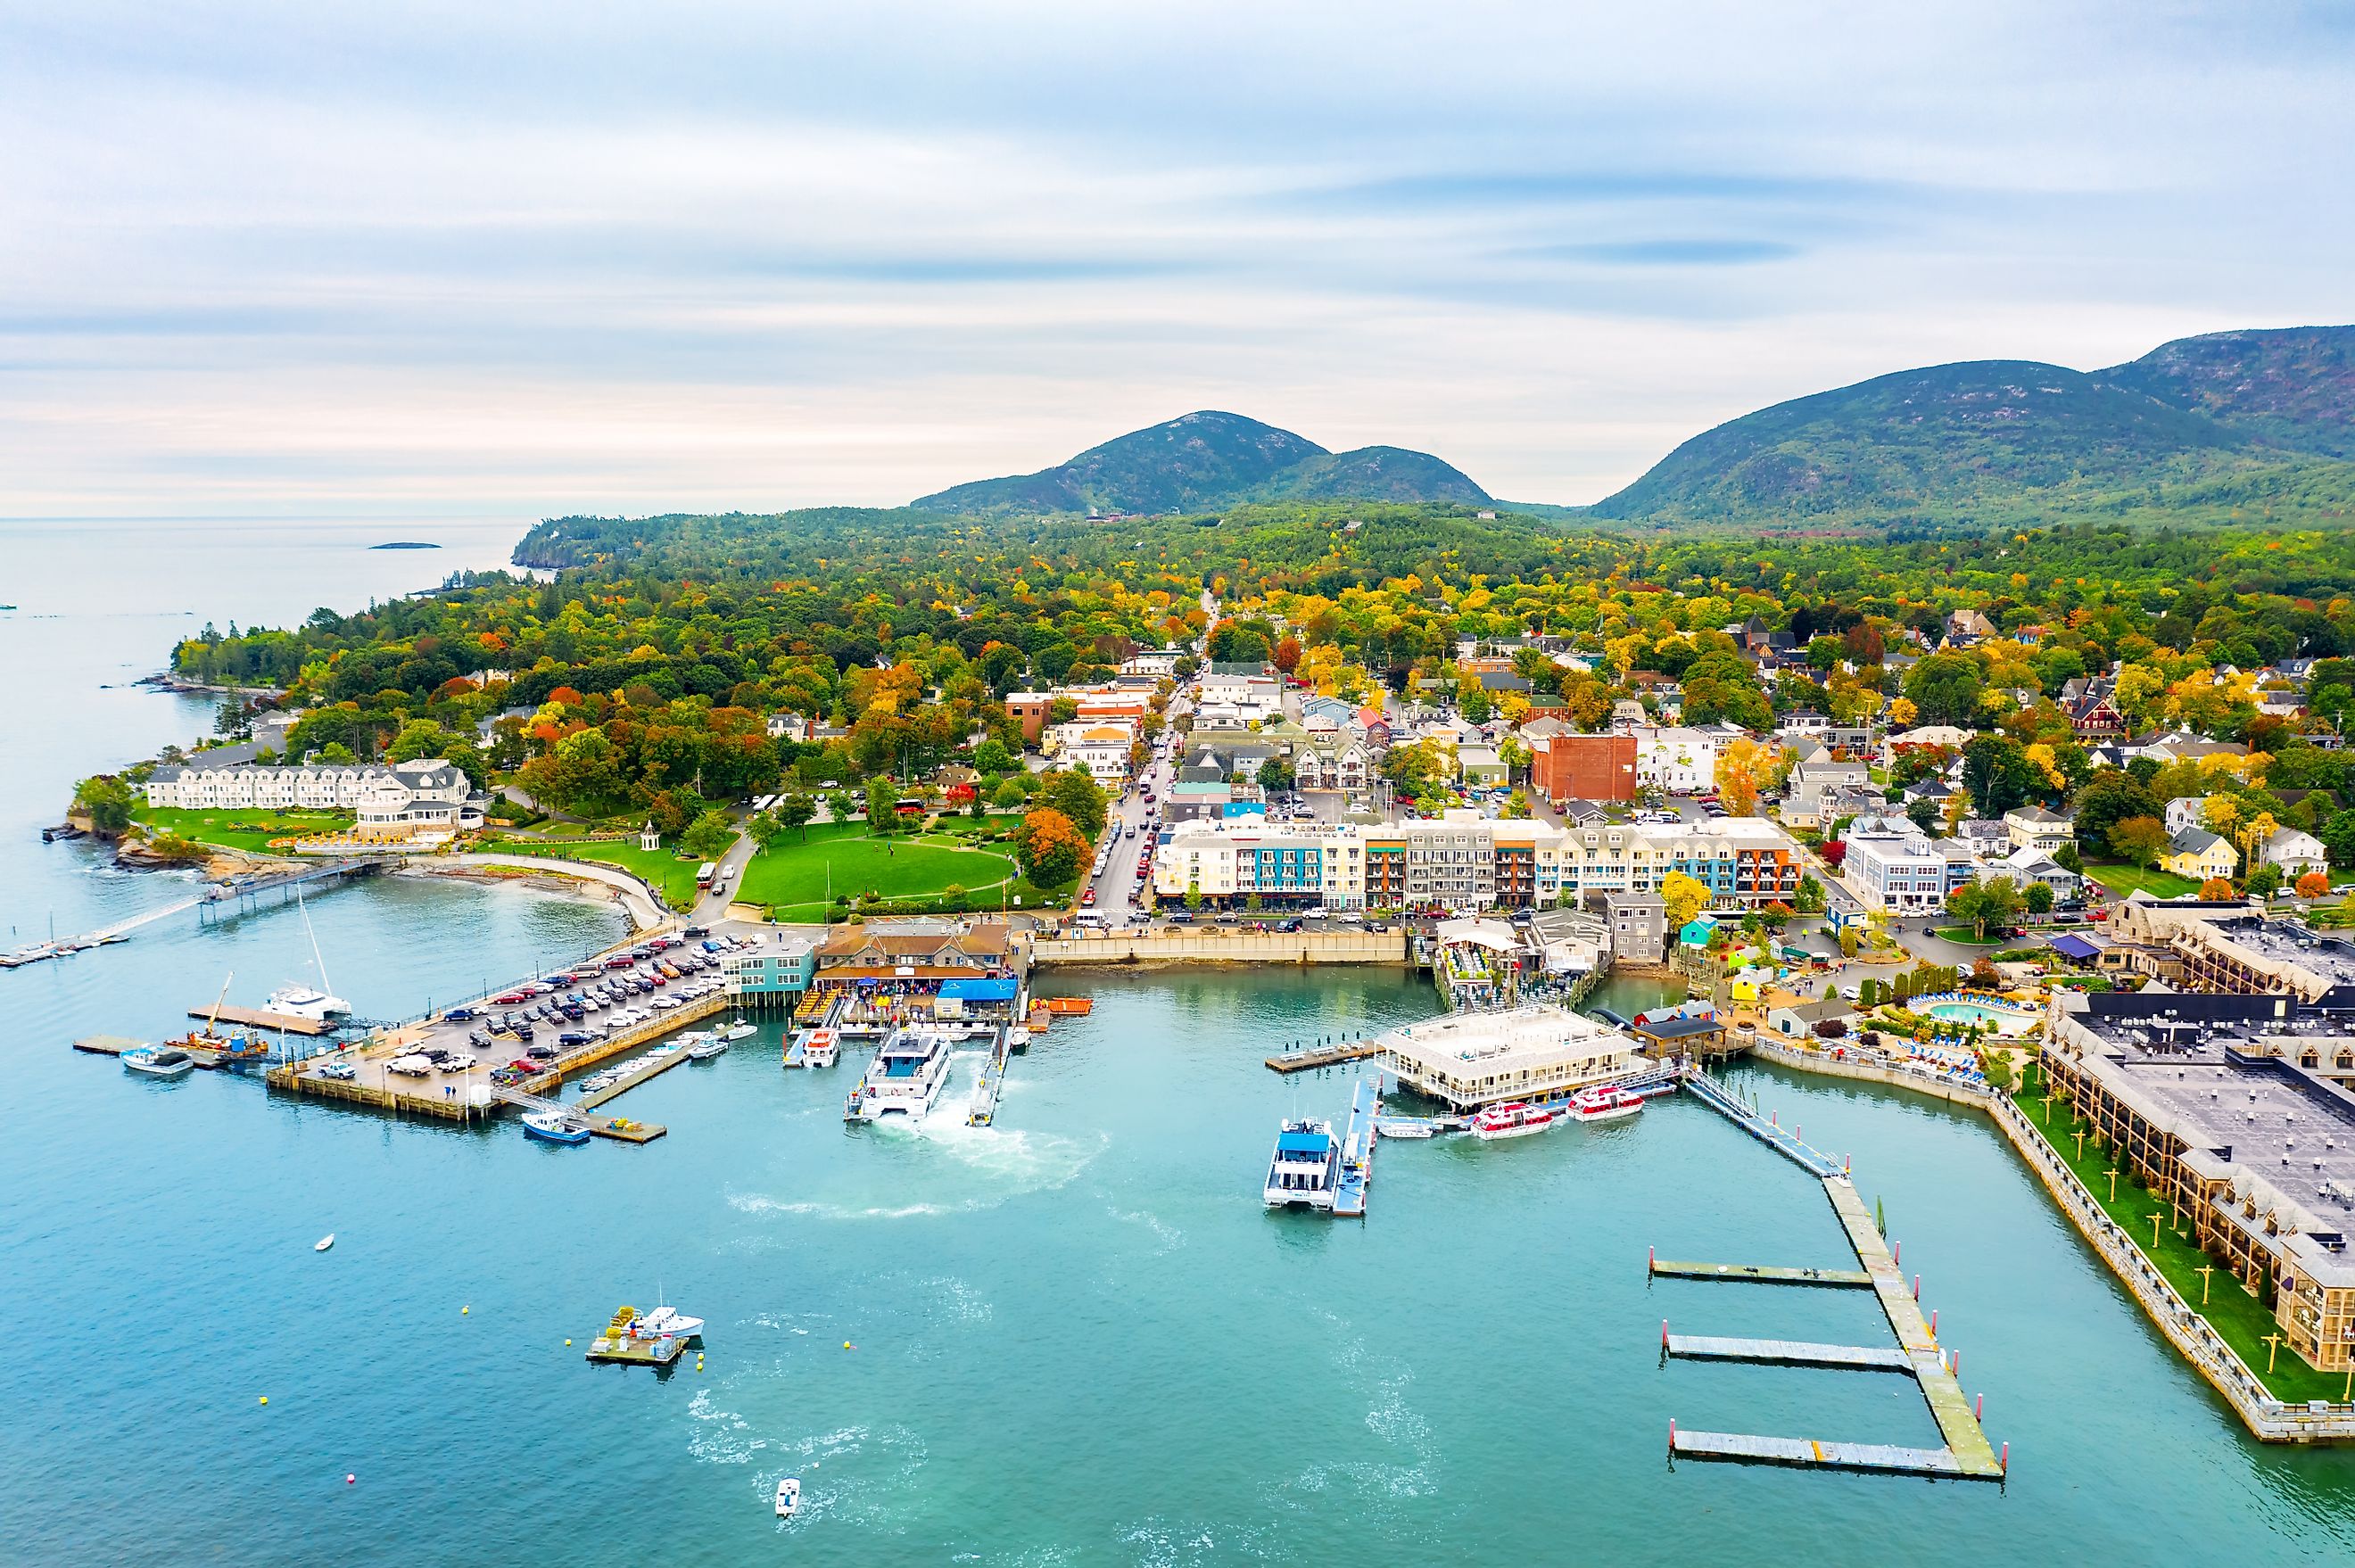 Aerial view of Bar Harbor, Maine, a popular tourist destination located on Mount Desert Island in Hancock County, Maine, USA.